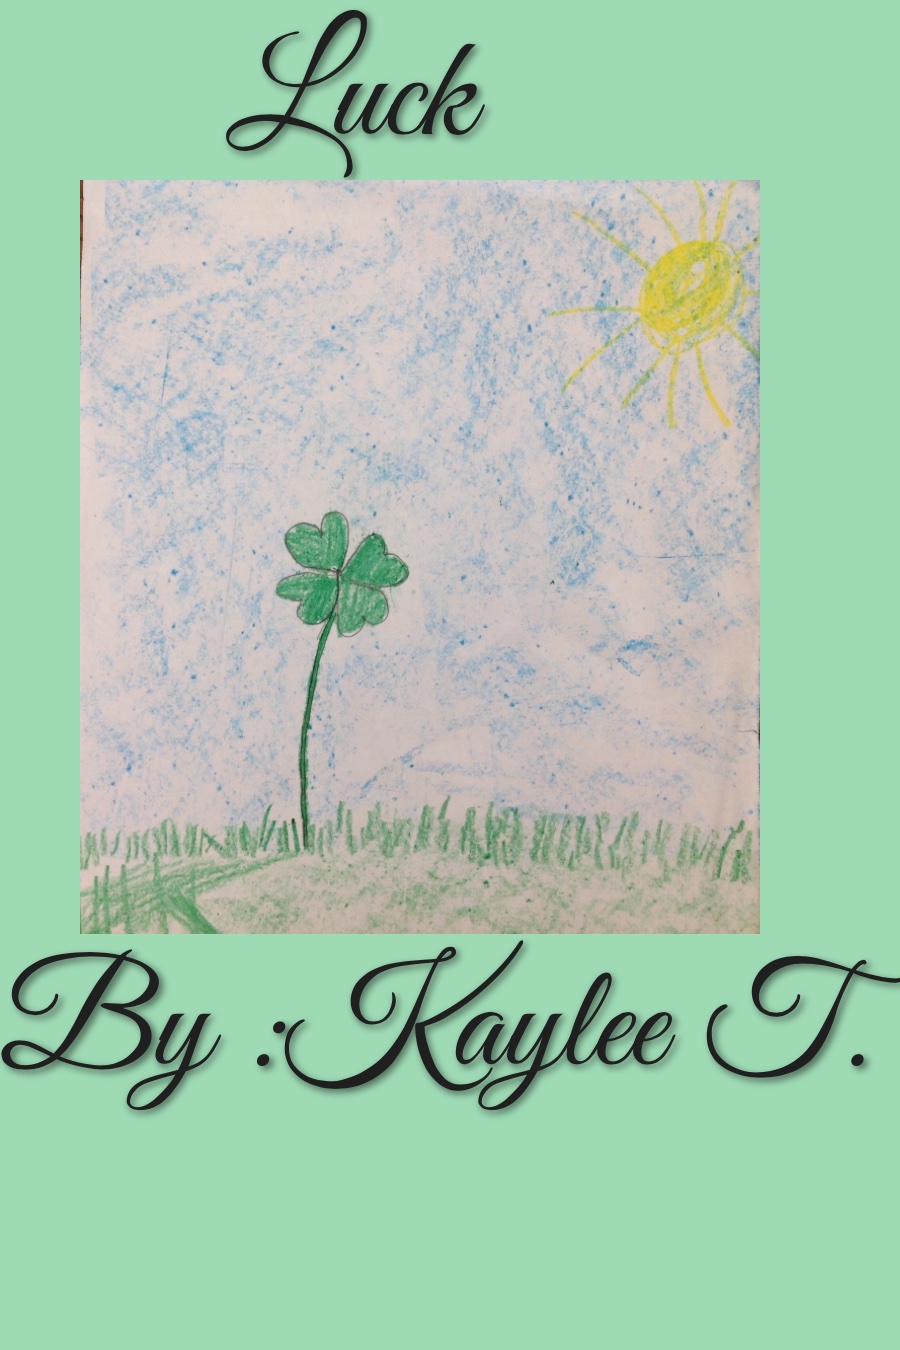 Luck by Kaylee T